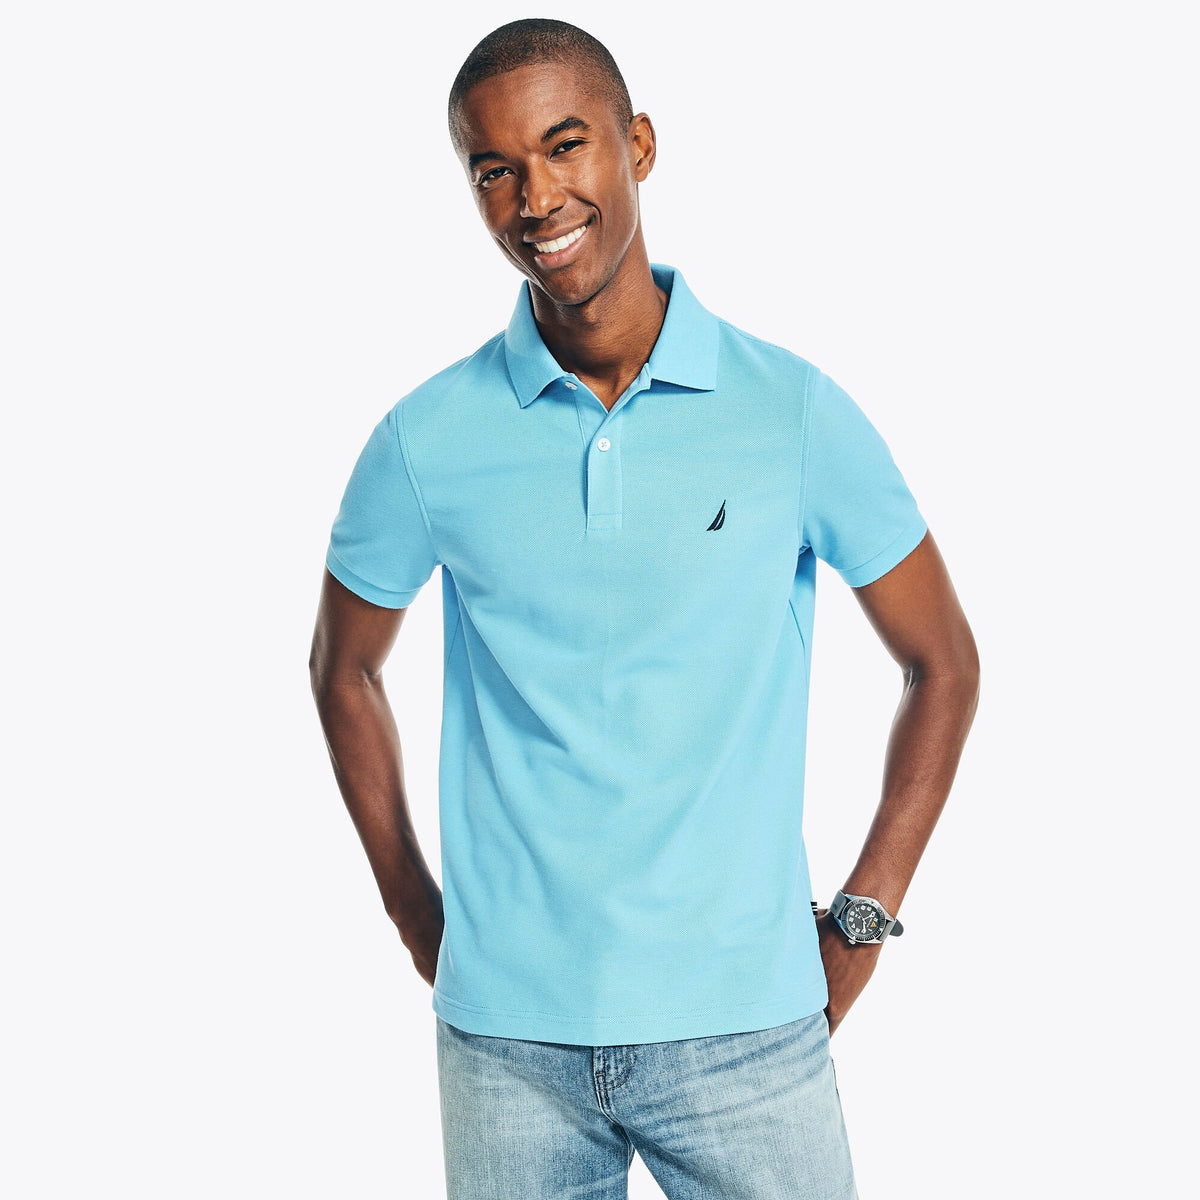 Nautica Men's Sustainably Crafted Slim Fit Deck Polo Azure Blue